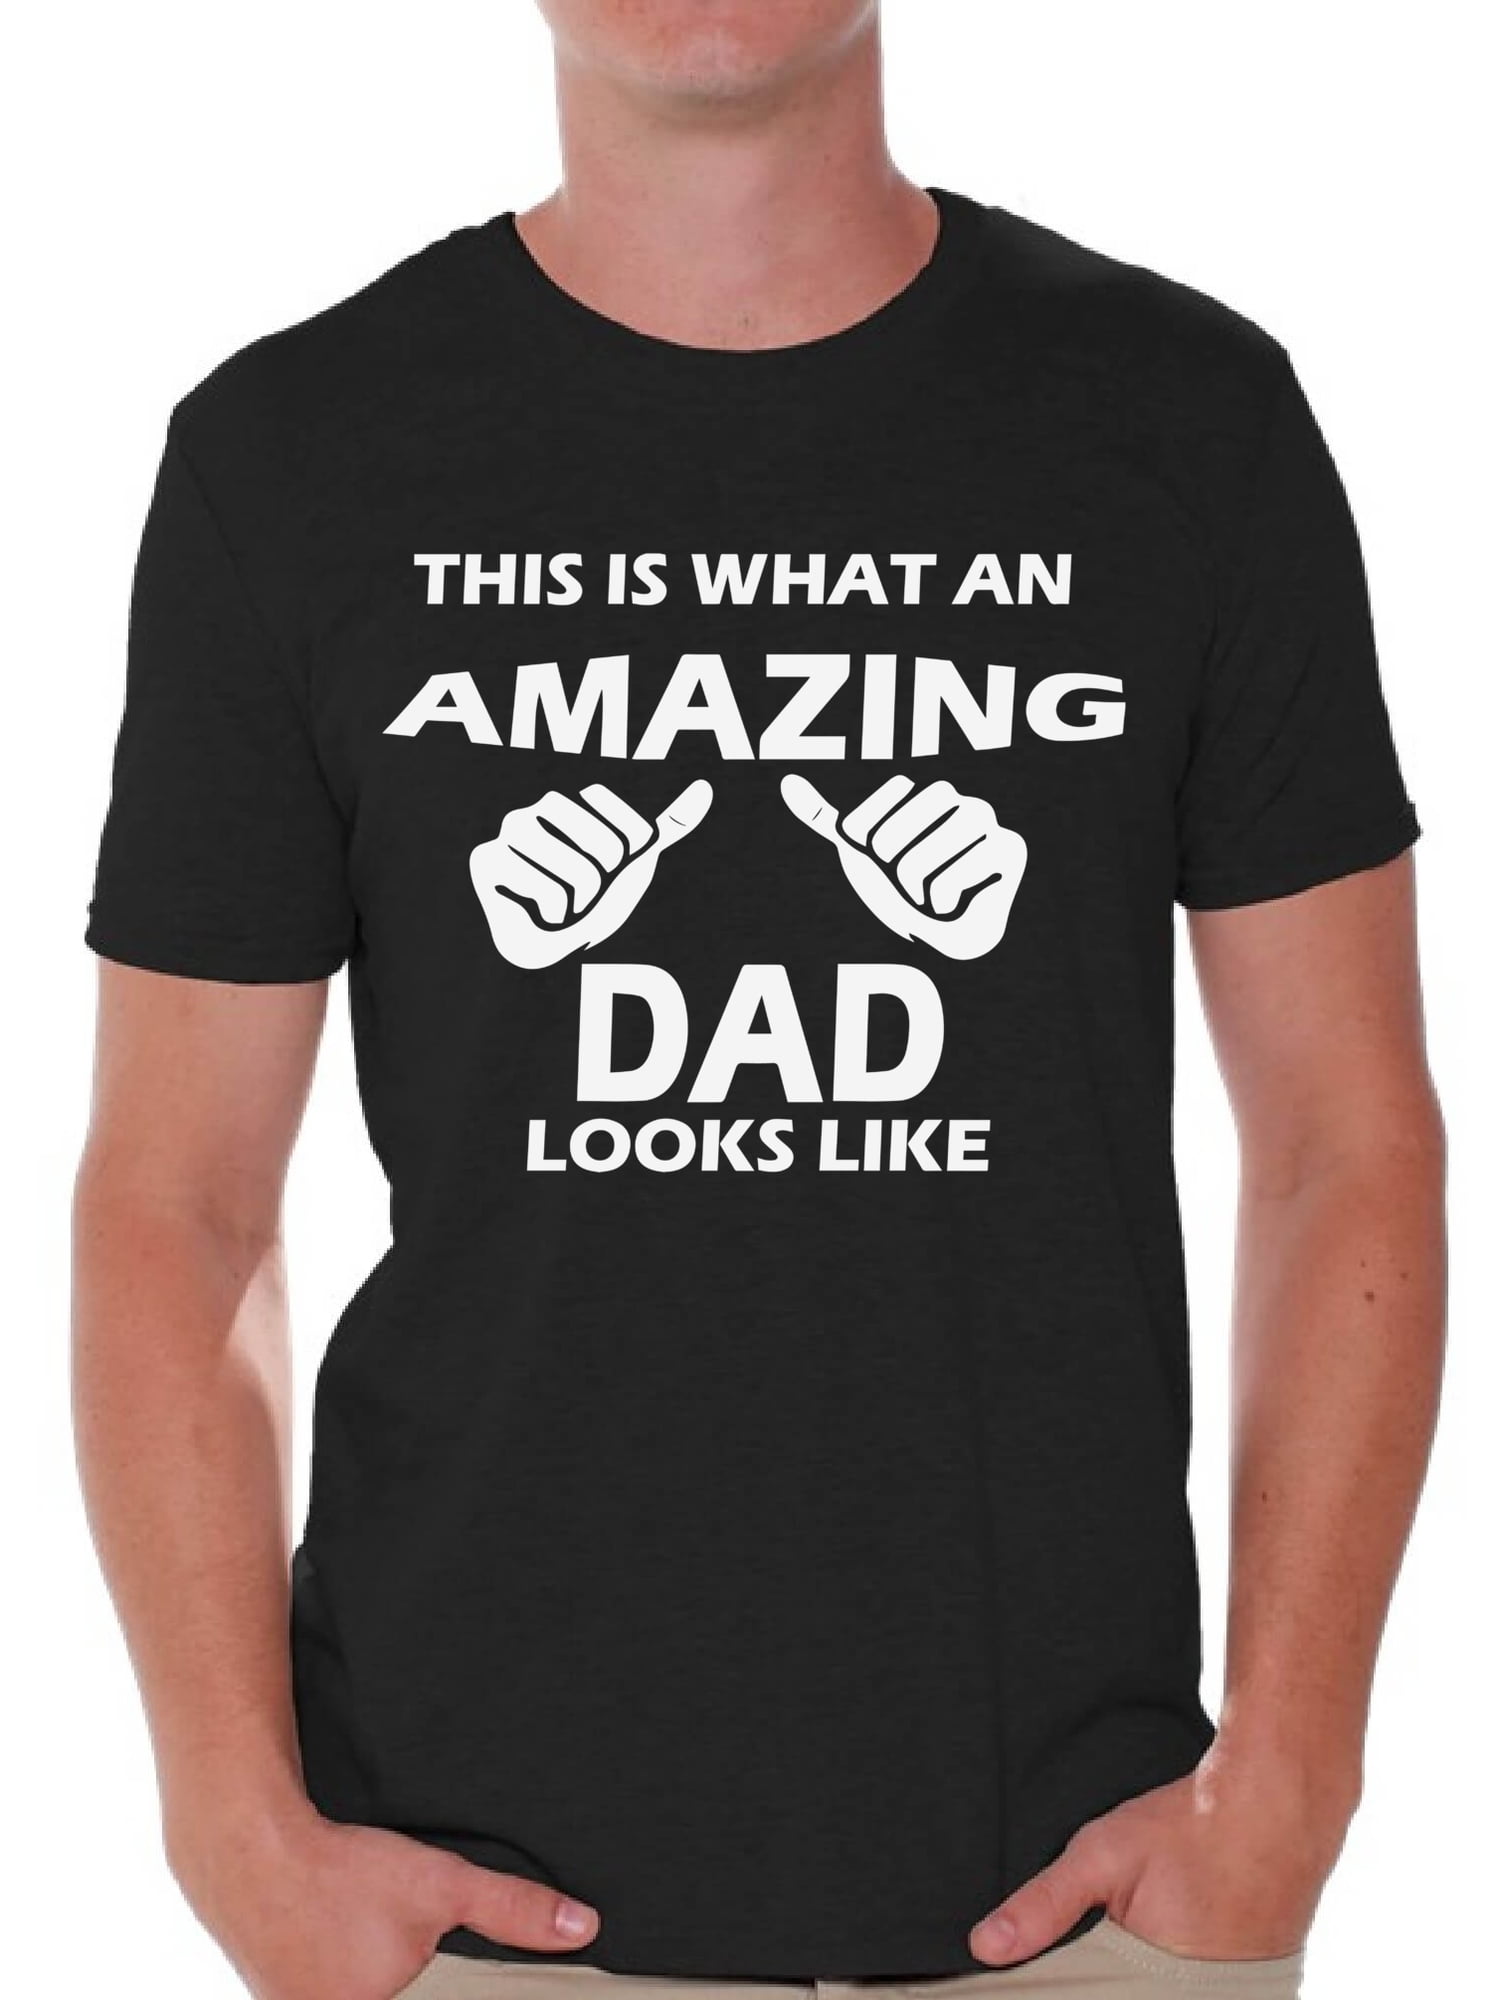 Awkward Styles This Is What An Amazing Dad Looks Like Shirt Amazing Dad Mens Graphic Tshirt Tops Daddy Gifts for Fathers Day Dad Tshirt Father Gifts Best Dad Tshirts